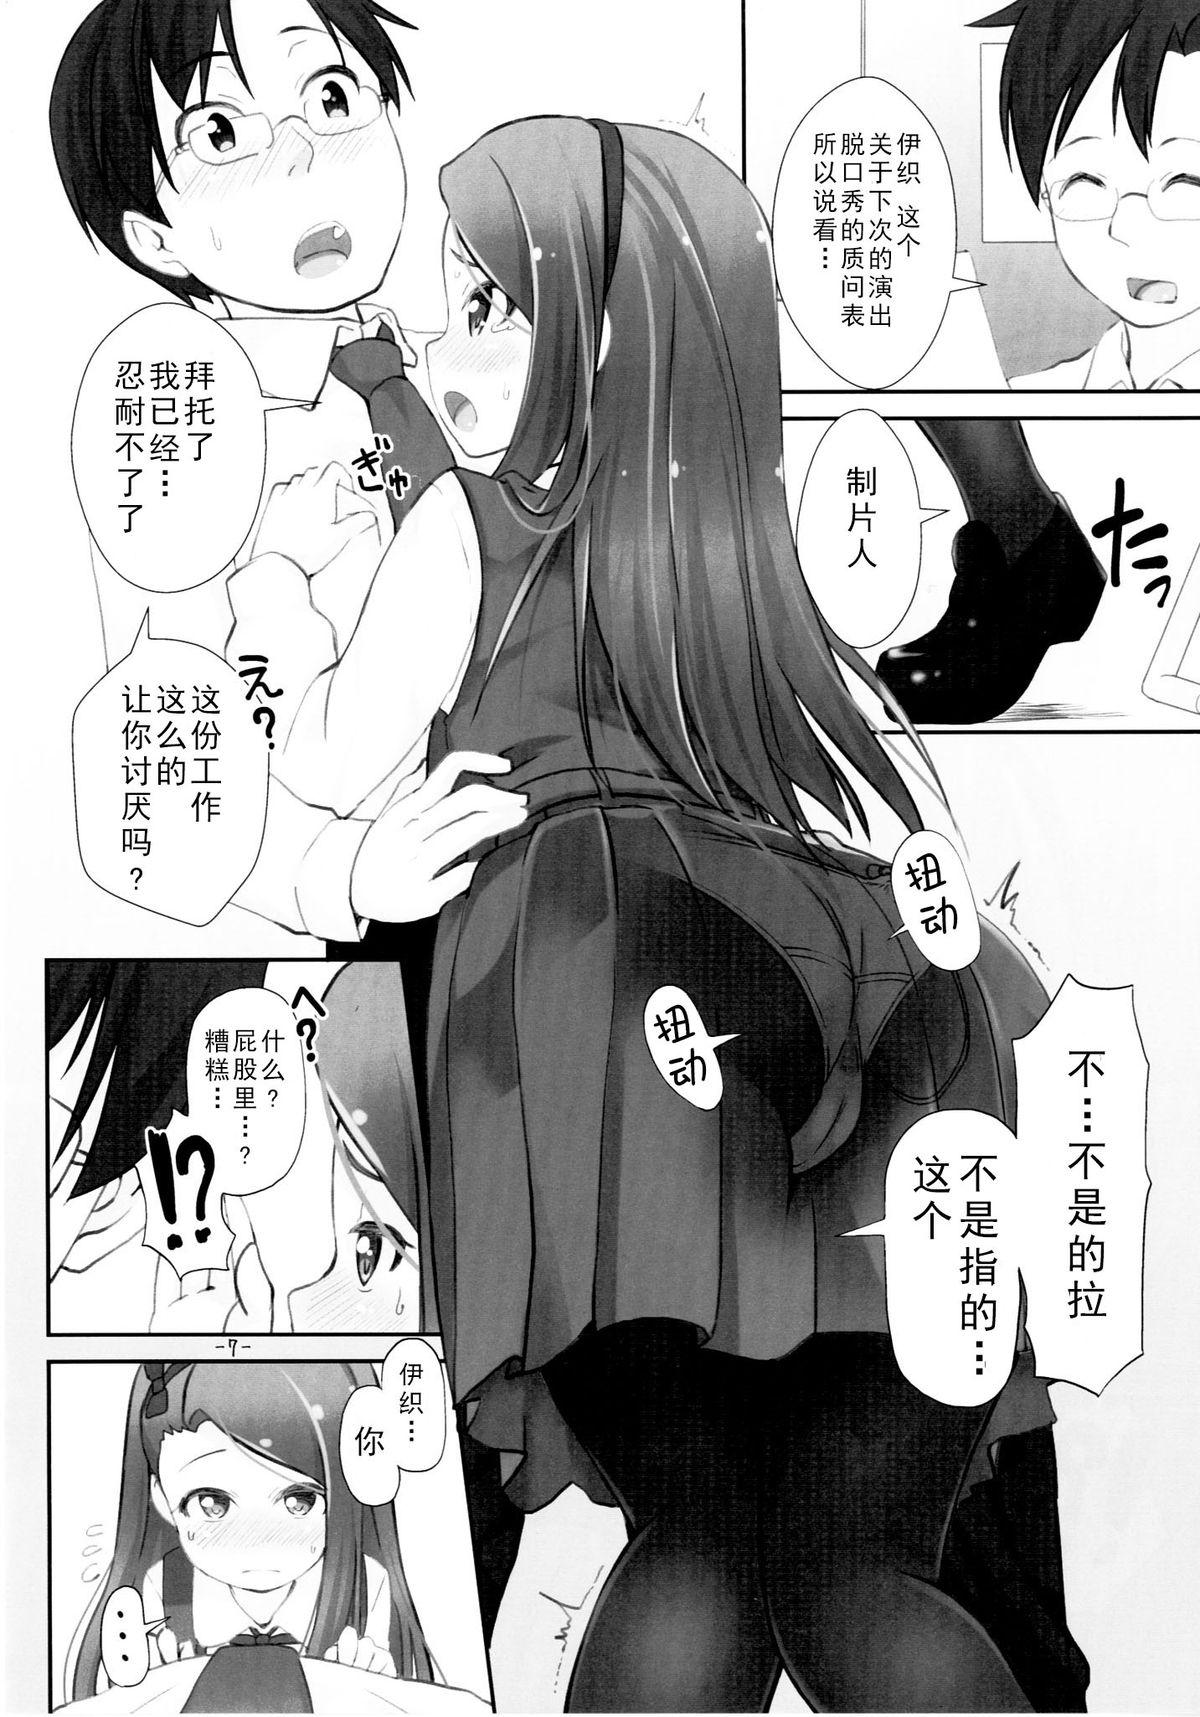 Exhibition IORIX SGW - The idolmaster Kinky - Page 7